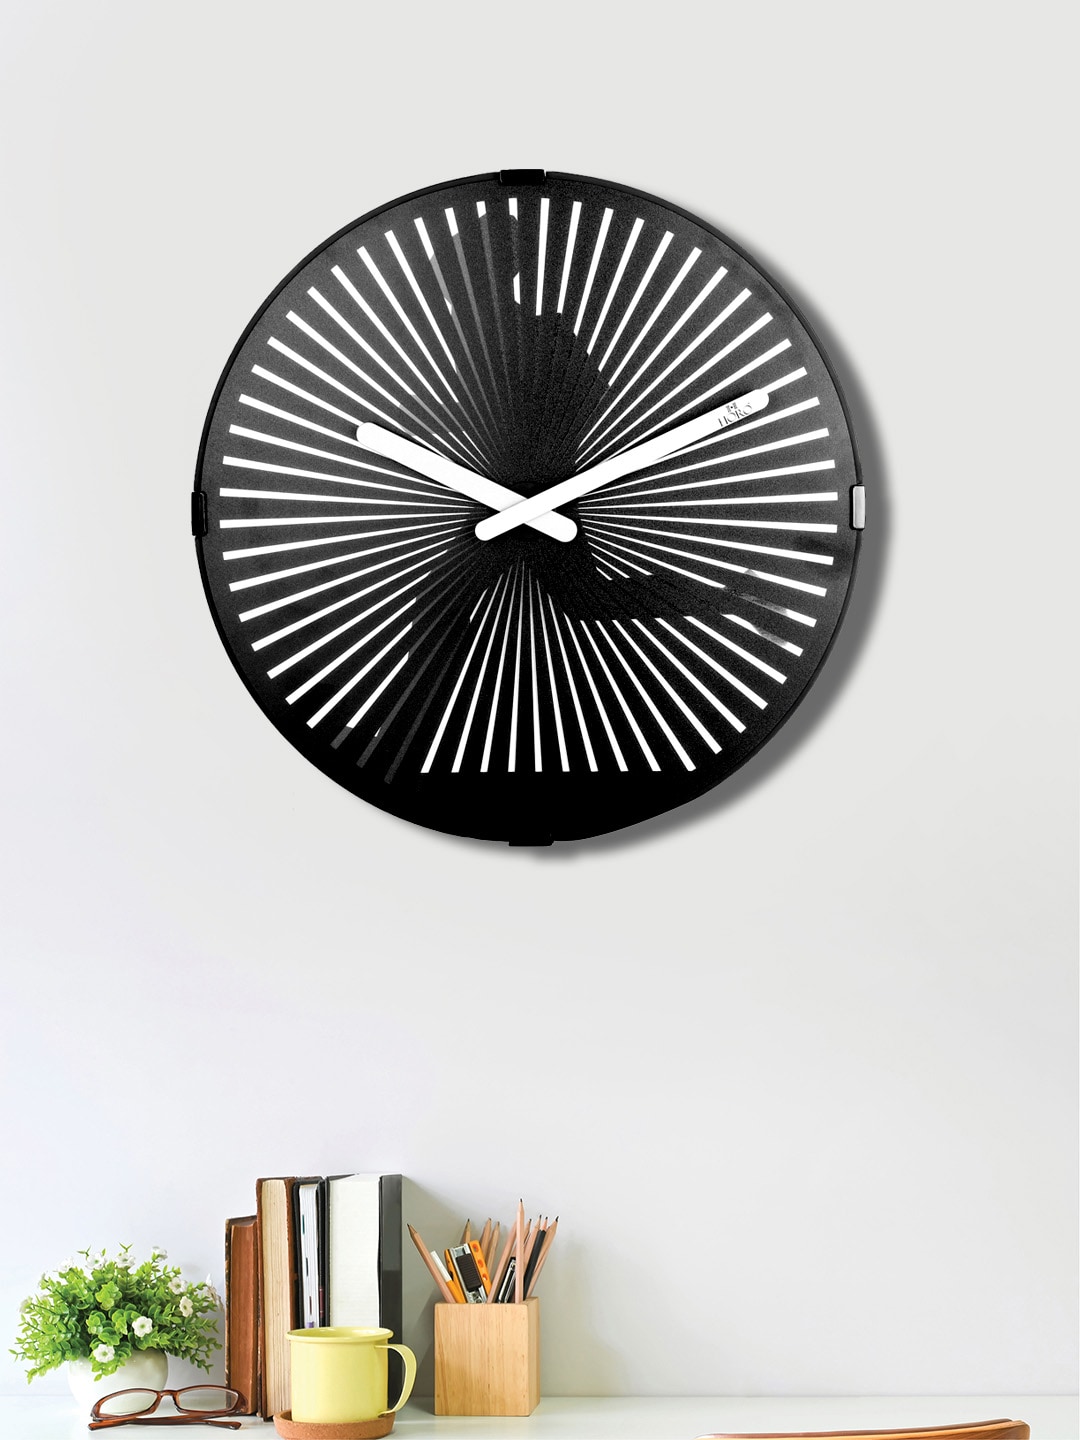 Horo White & Black Handcrafted Round Solid 30 cm Analogue Table Clock Price in India